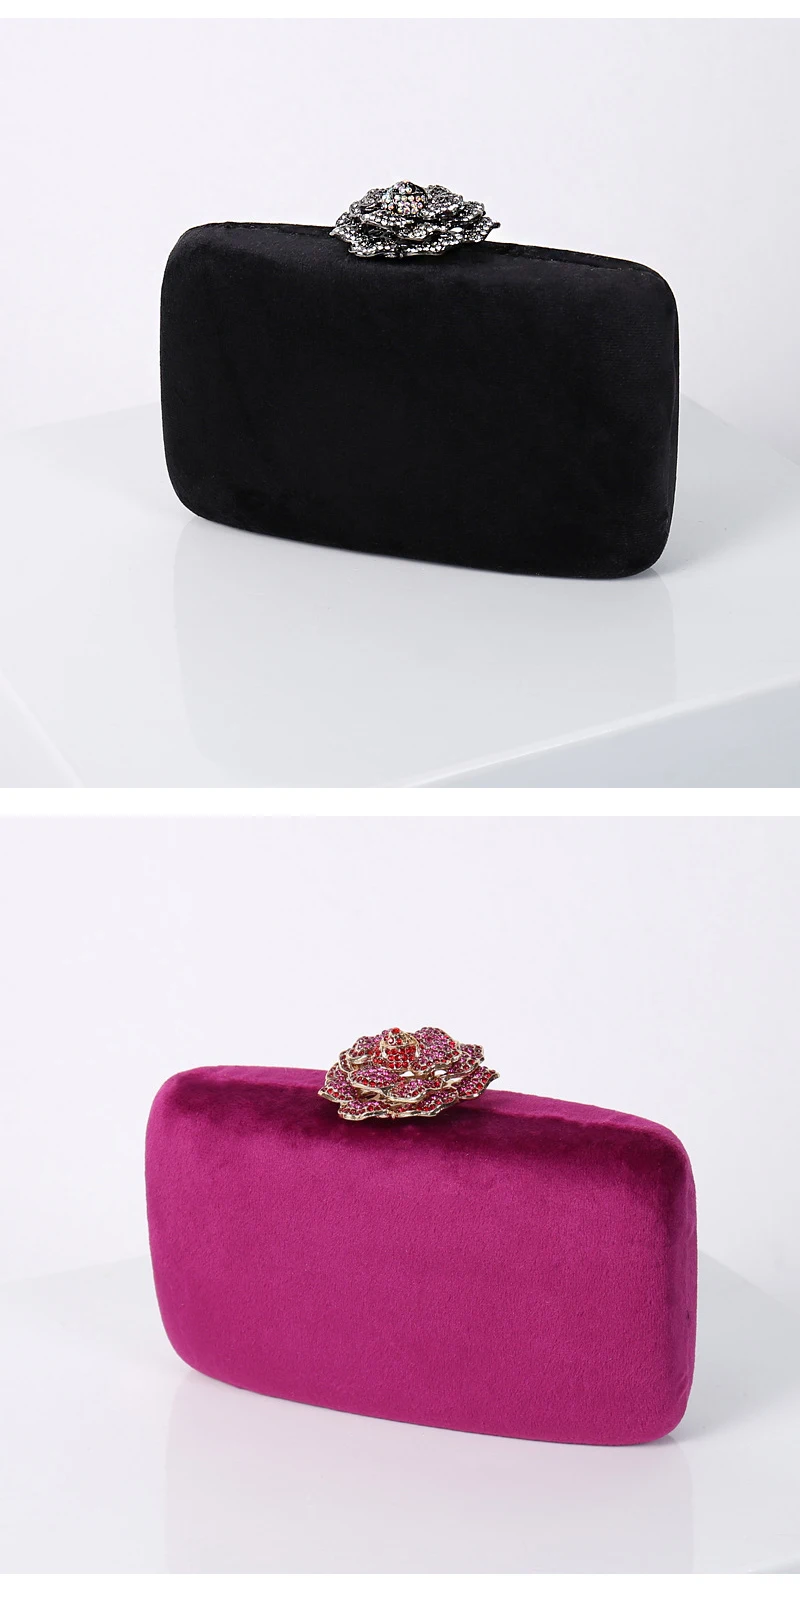 Luxy Moon Black and Rose Red Velvet Clutch Bag Front View